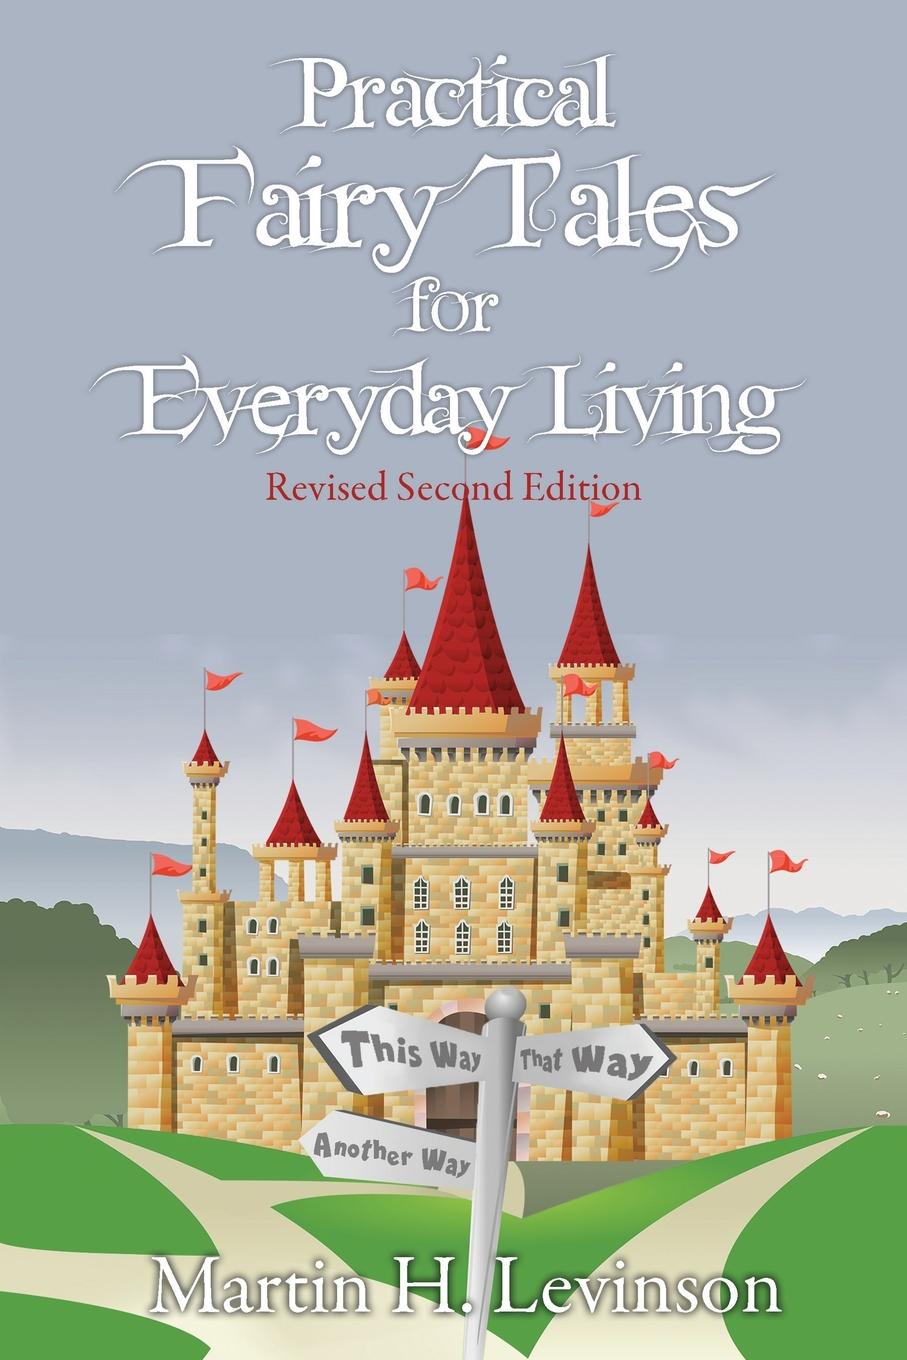 Practical Fairy Tales for Everyday Living (Revised Second Edition)